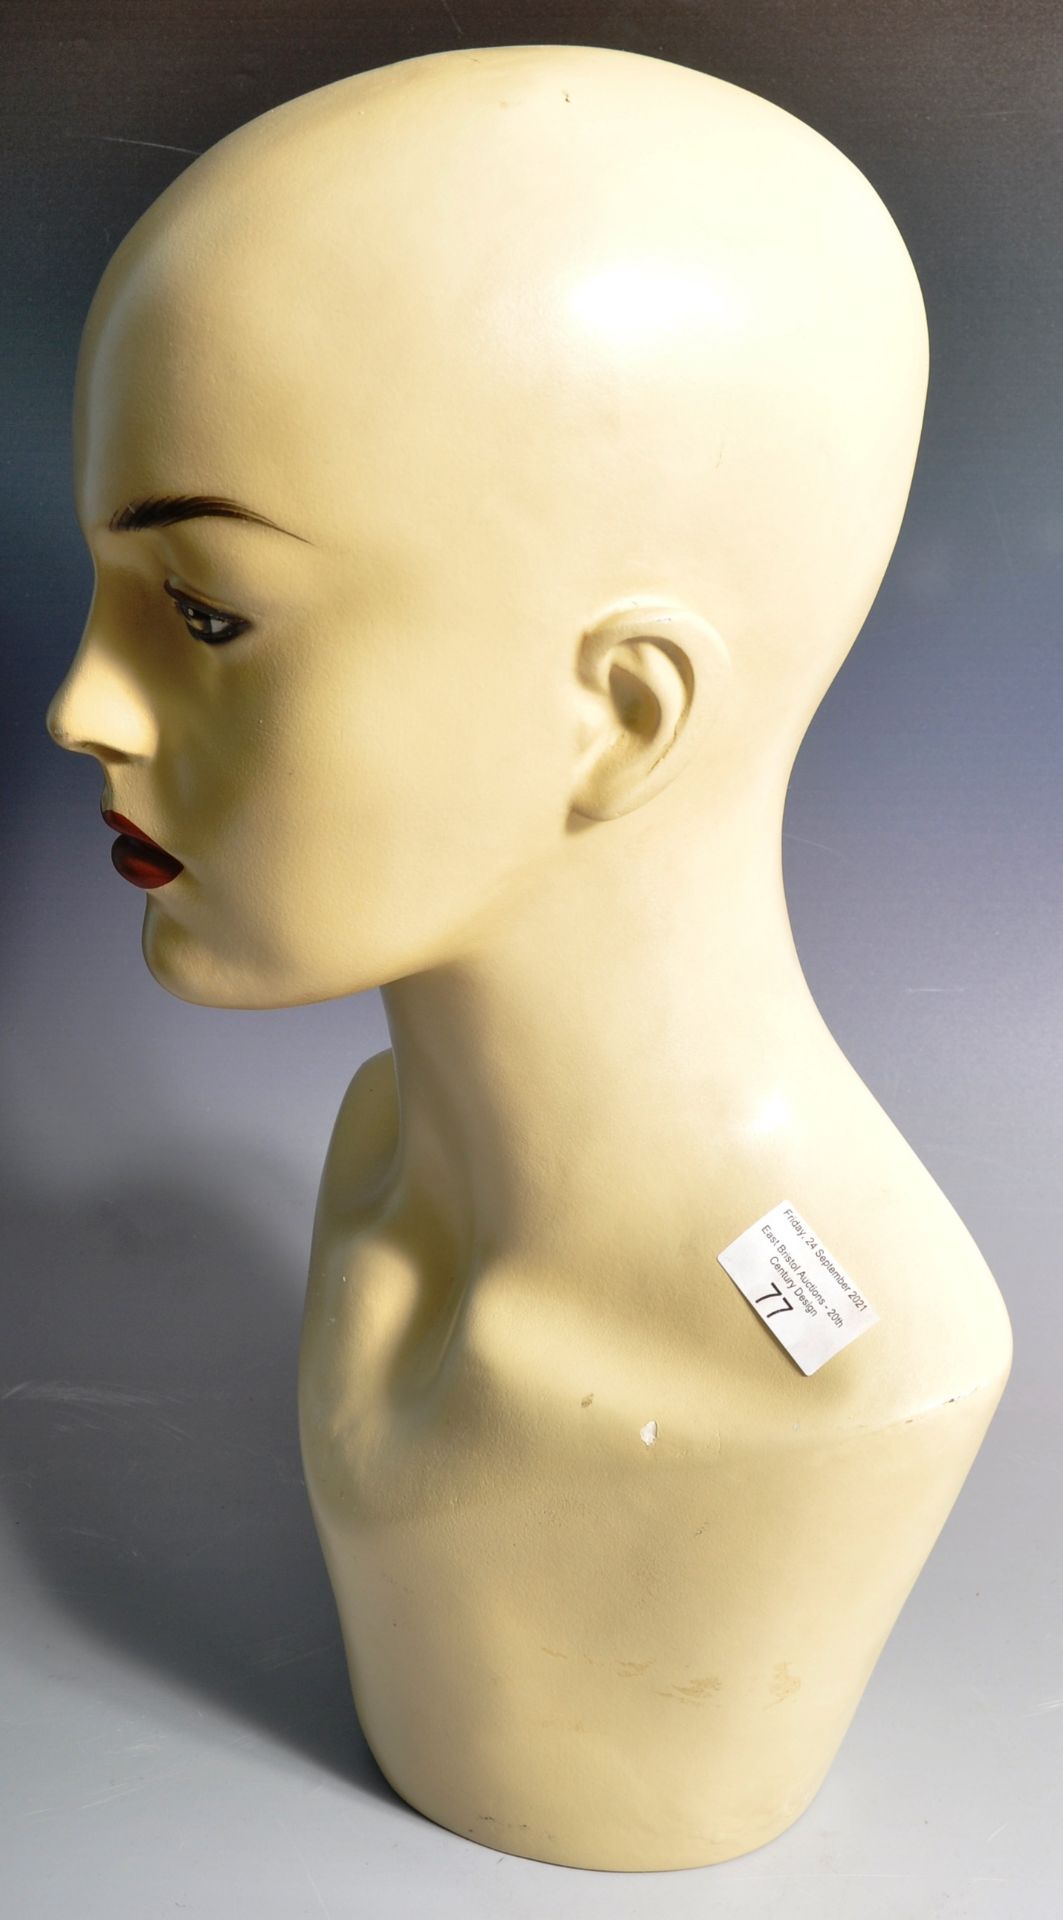 MID CENTURY SHOP HABERDASHERY POINT OF SALE MANNEQUIN HEAD - Image 5 of 6